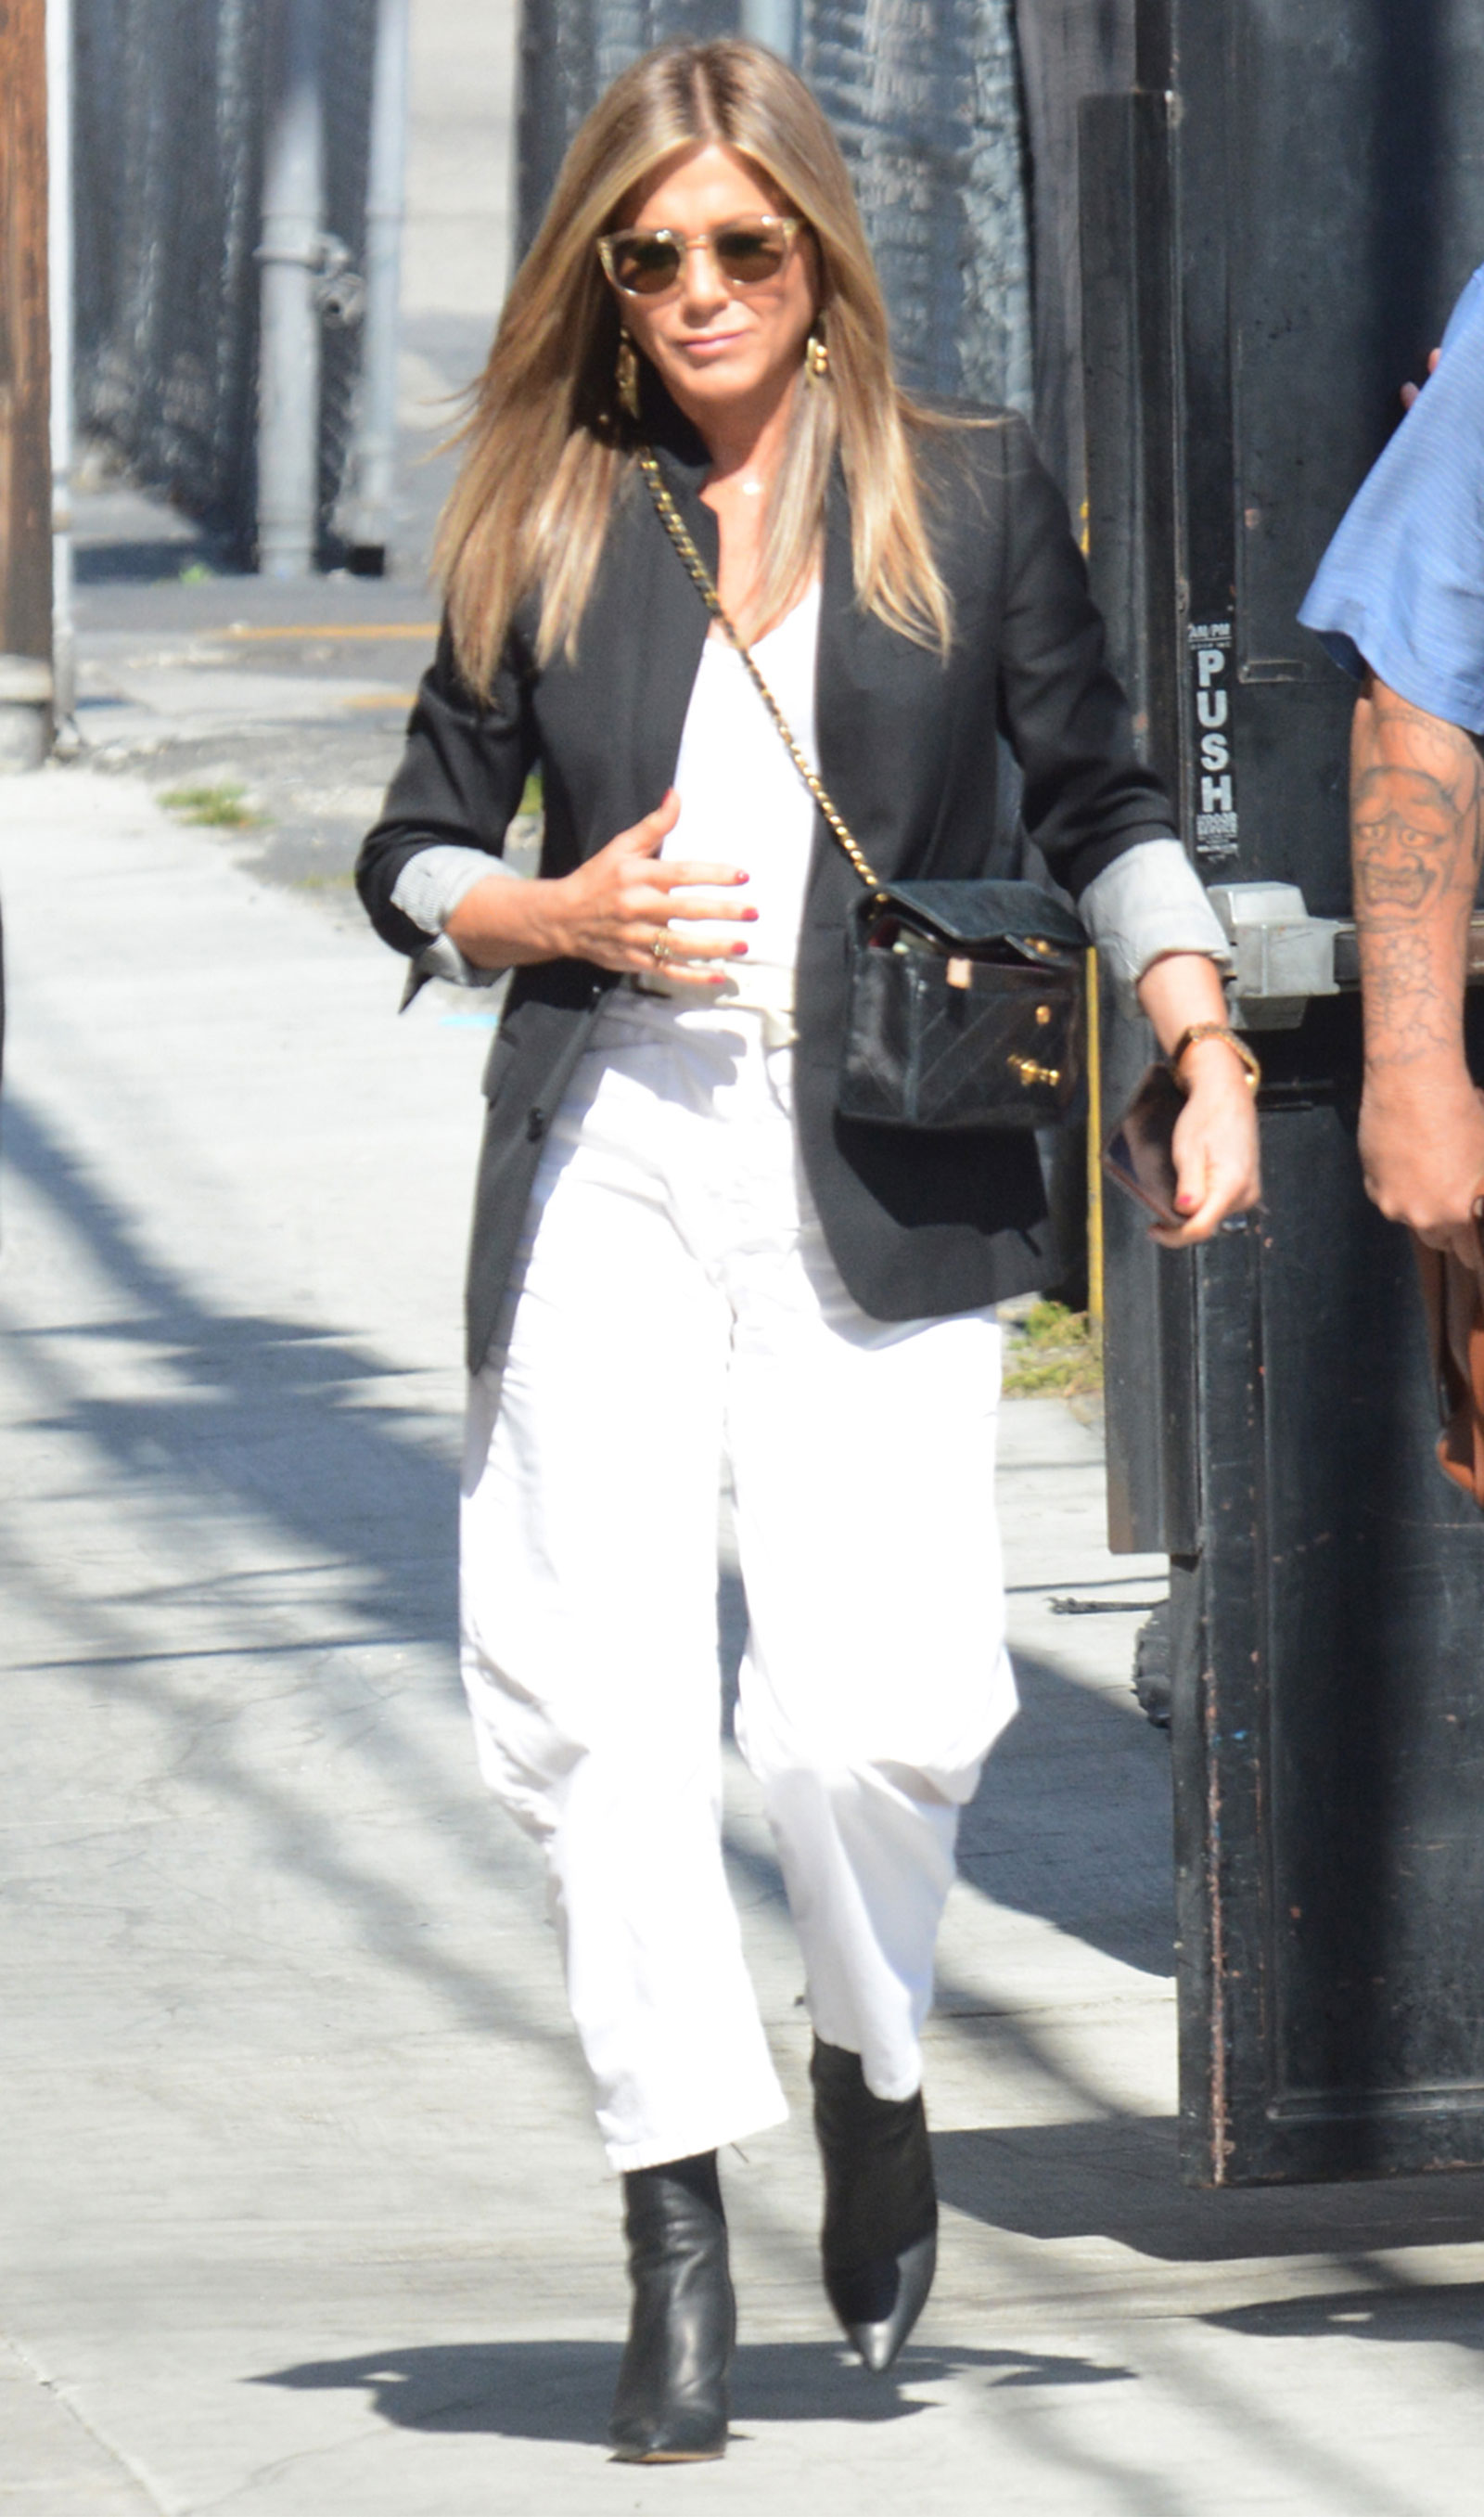 Love this black and white look on Jennifer Aniston